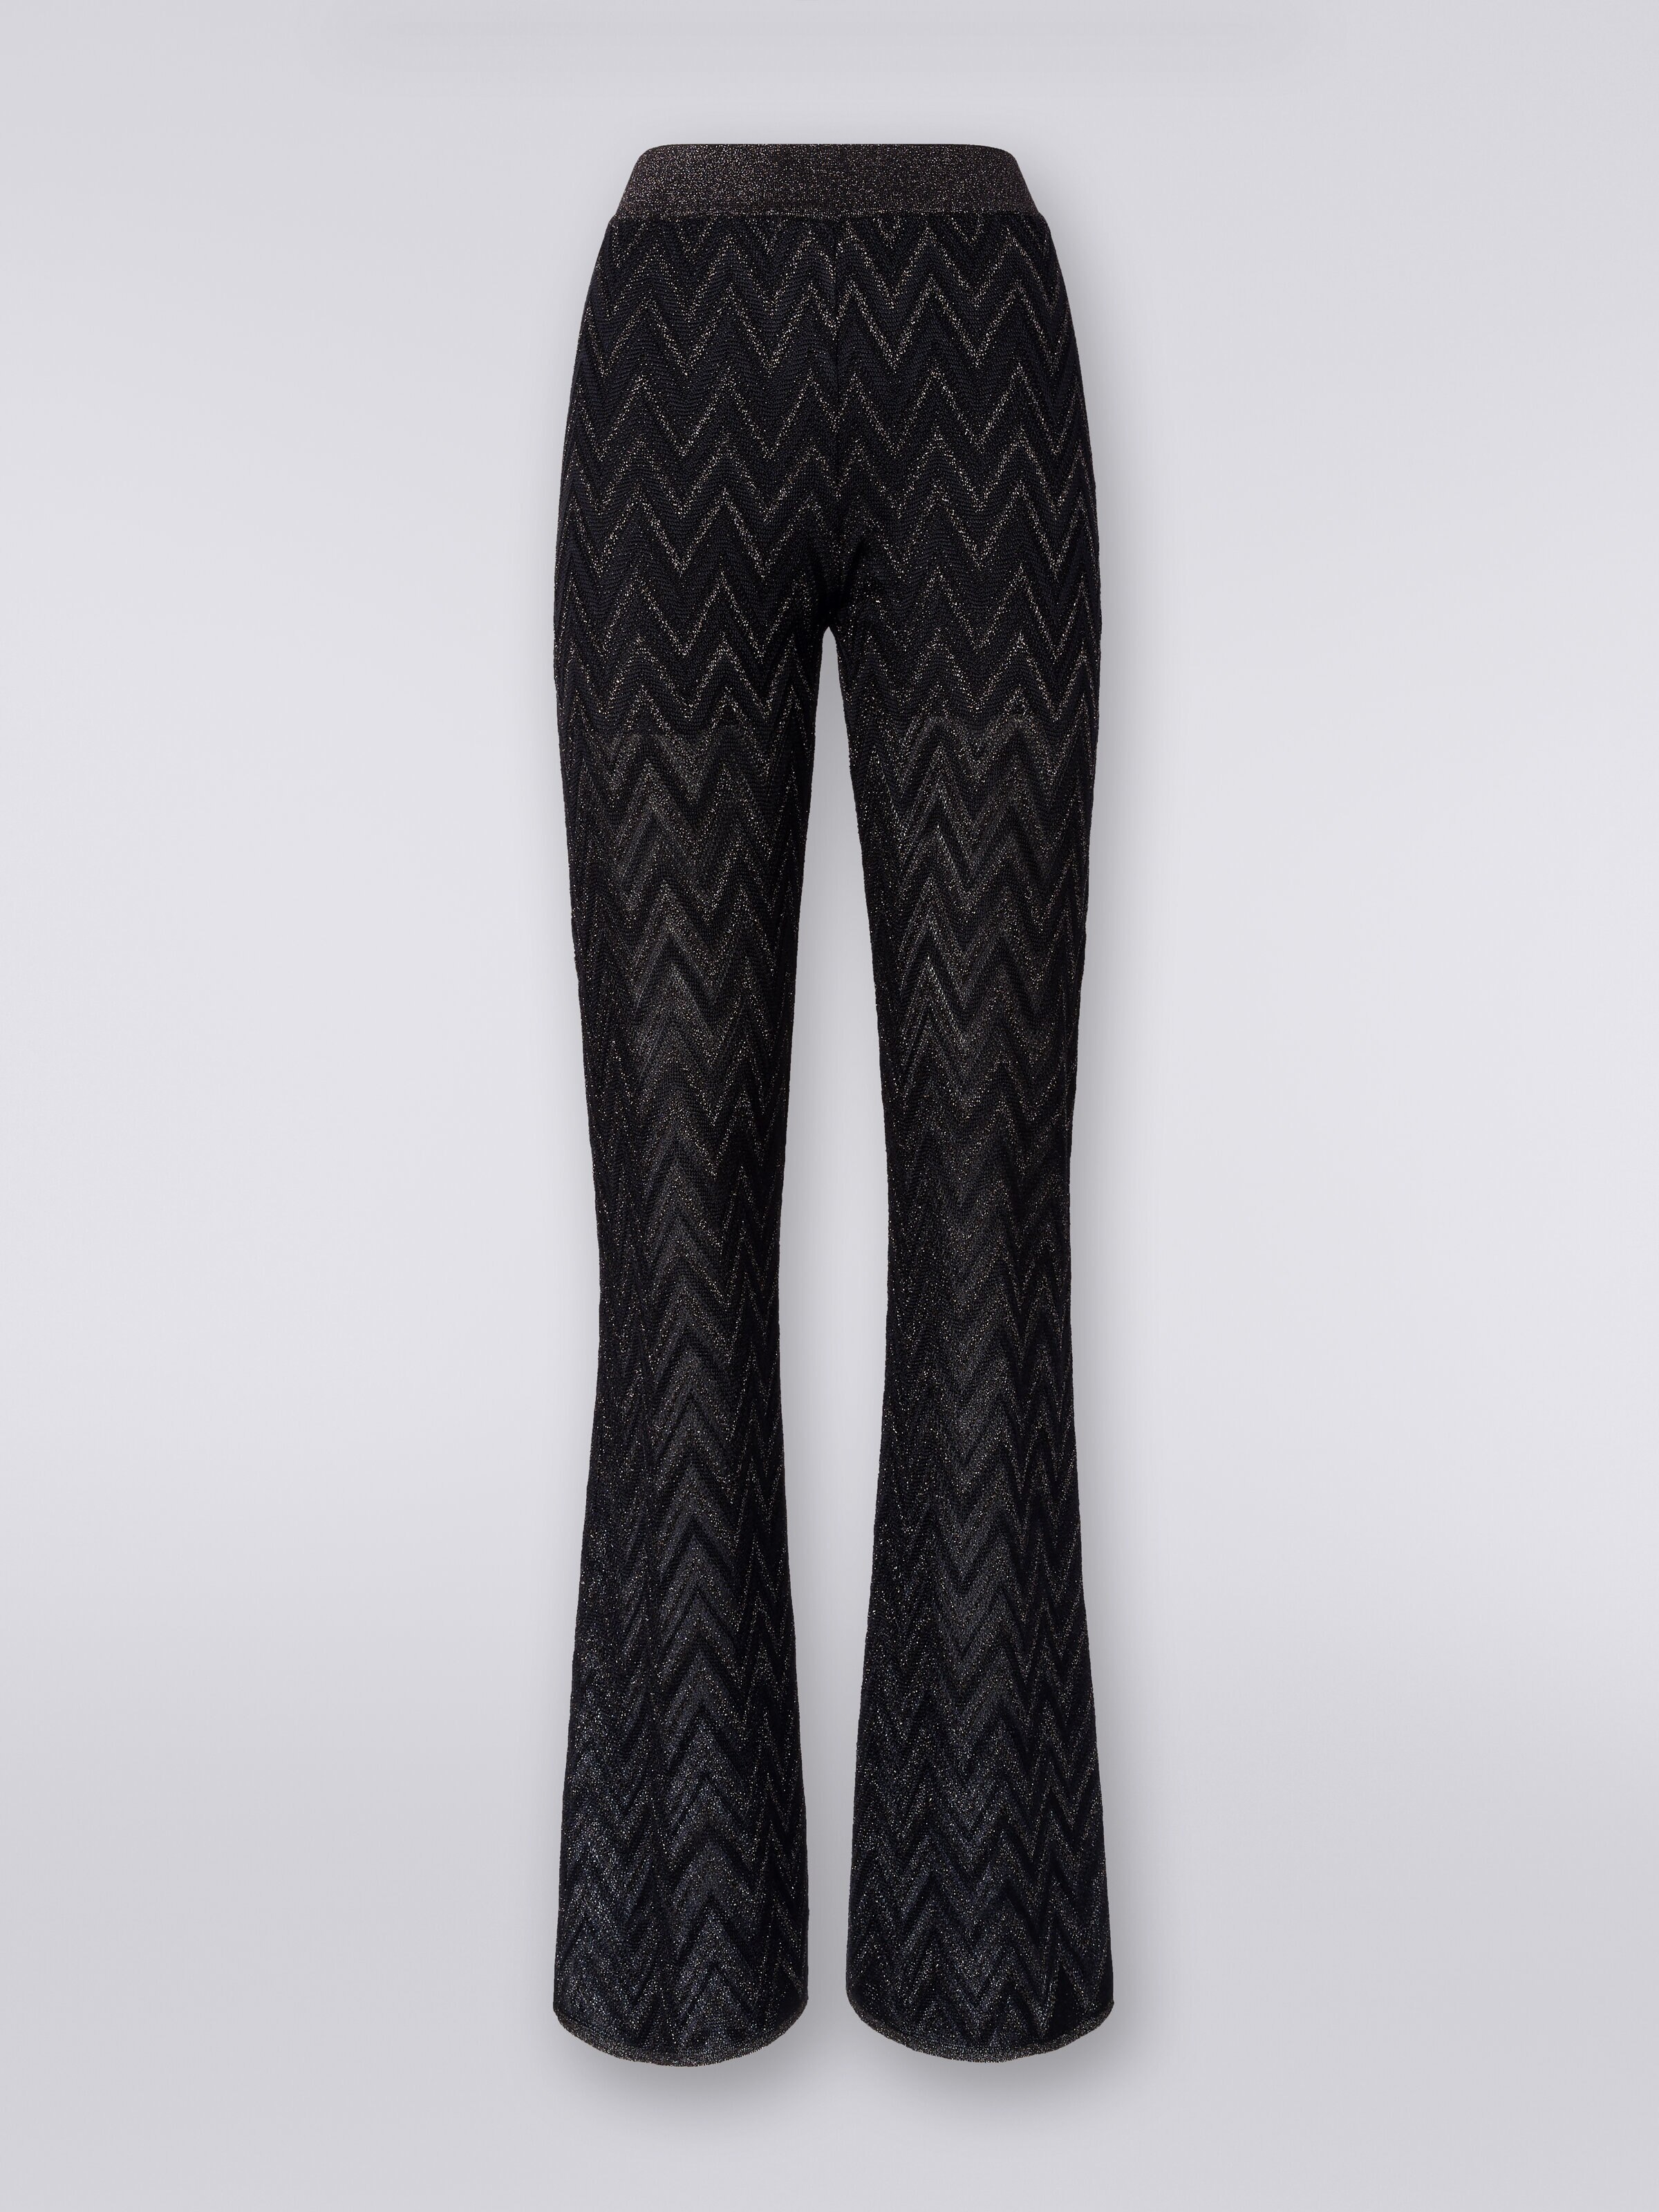 Trousers in zigzag viscose knit with lurex, Black    - 0